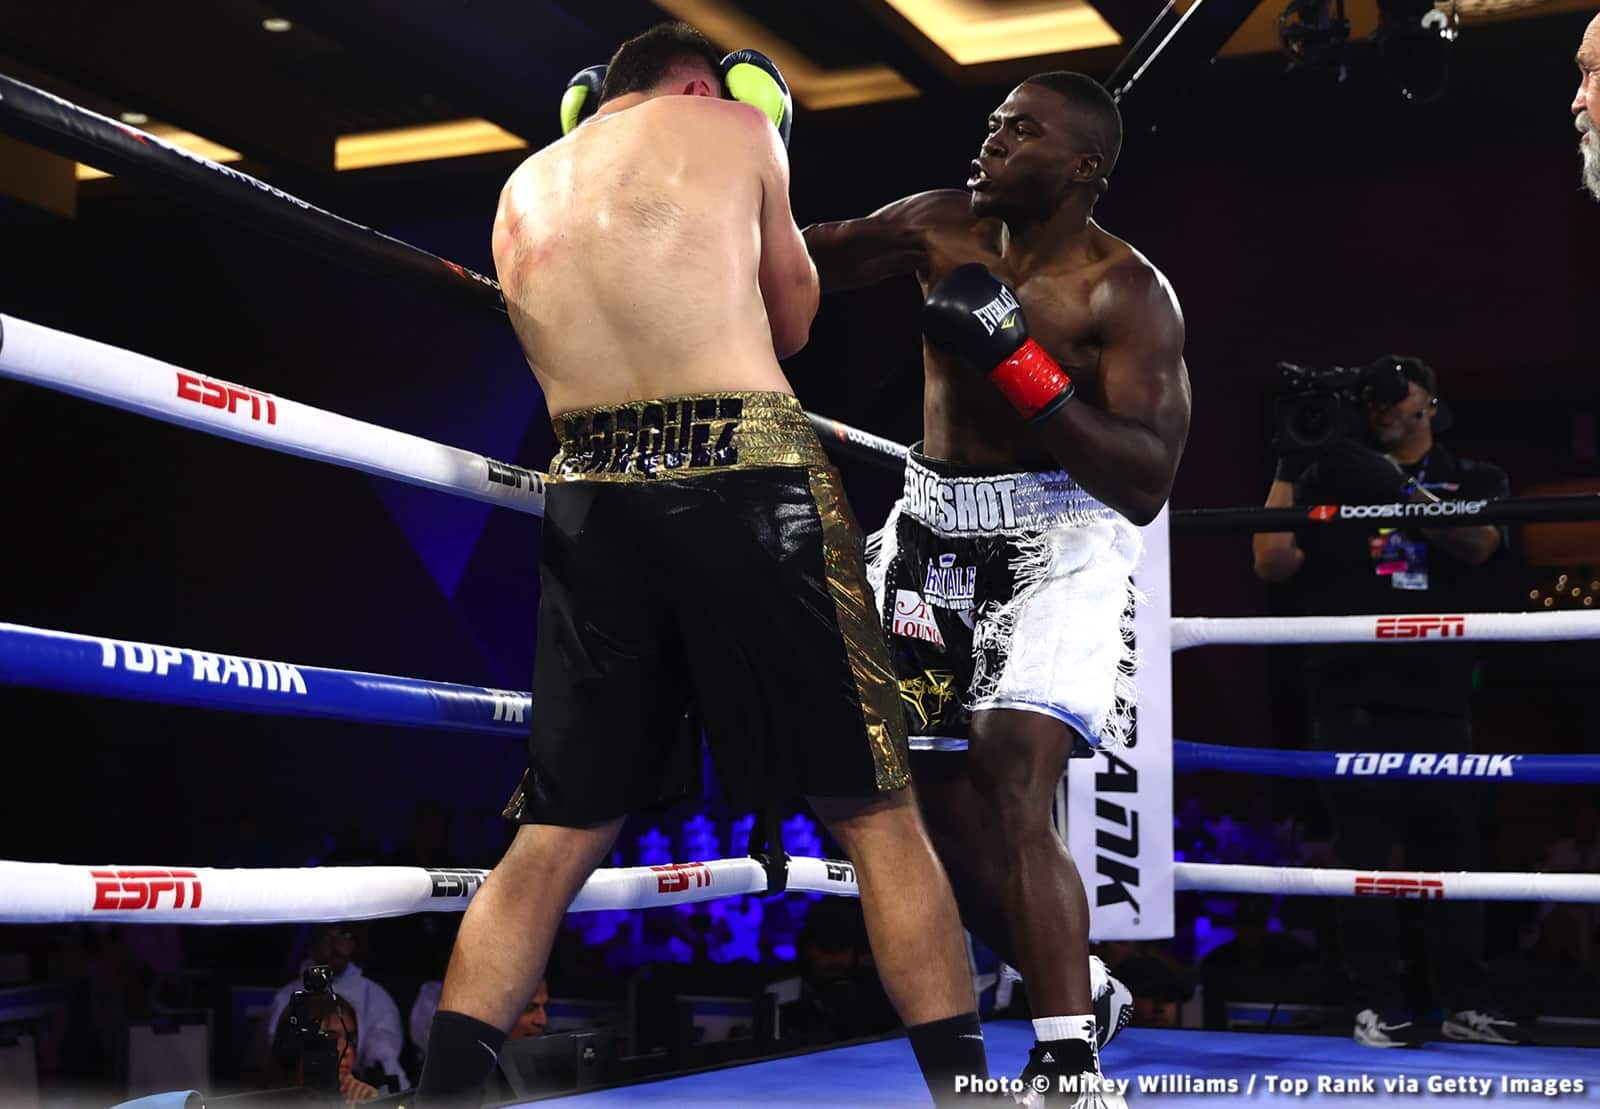 Stephan “Big Shot” Shaw Halts Bernardo Marquez In A Round, Shows He Is A Force To Be Reckoned With